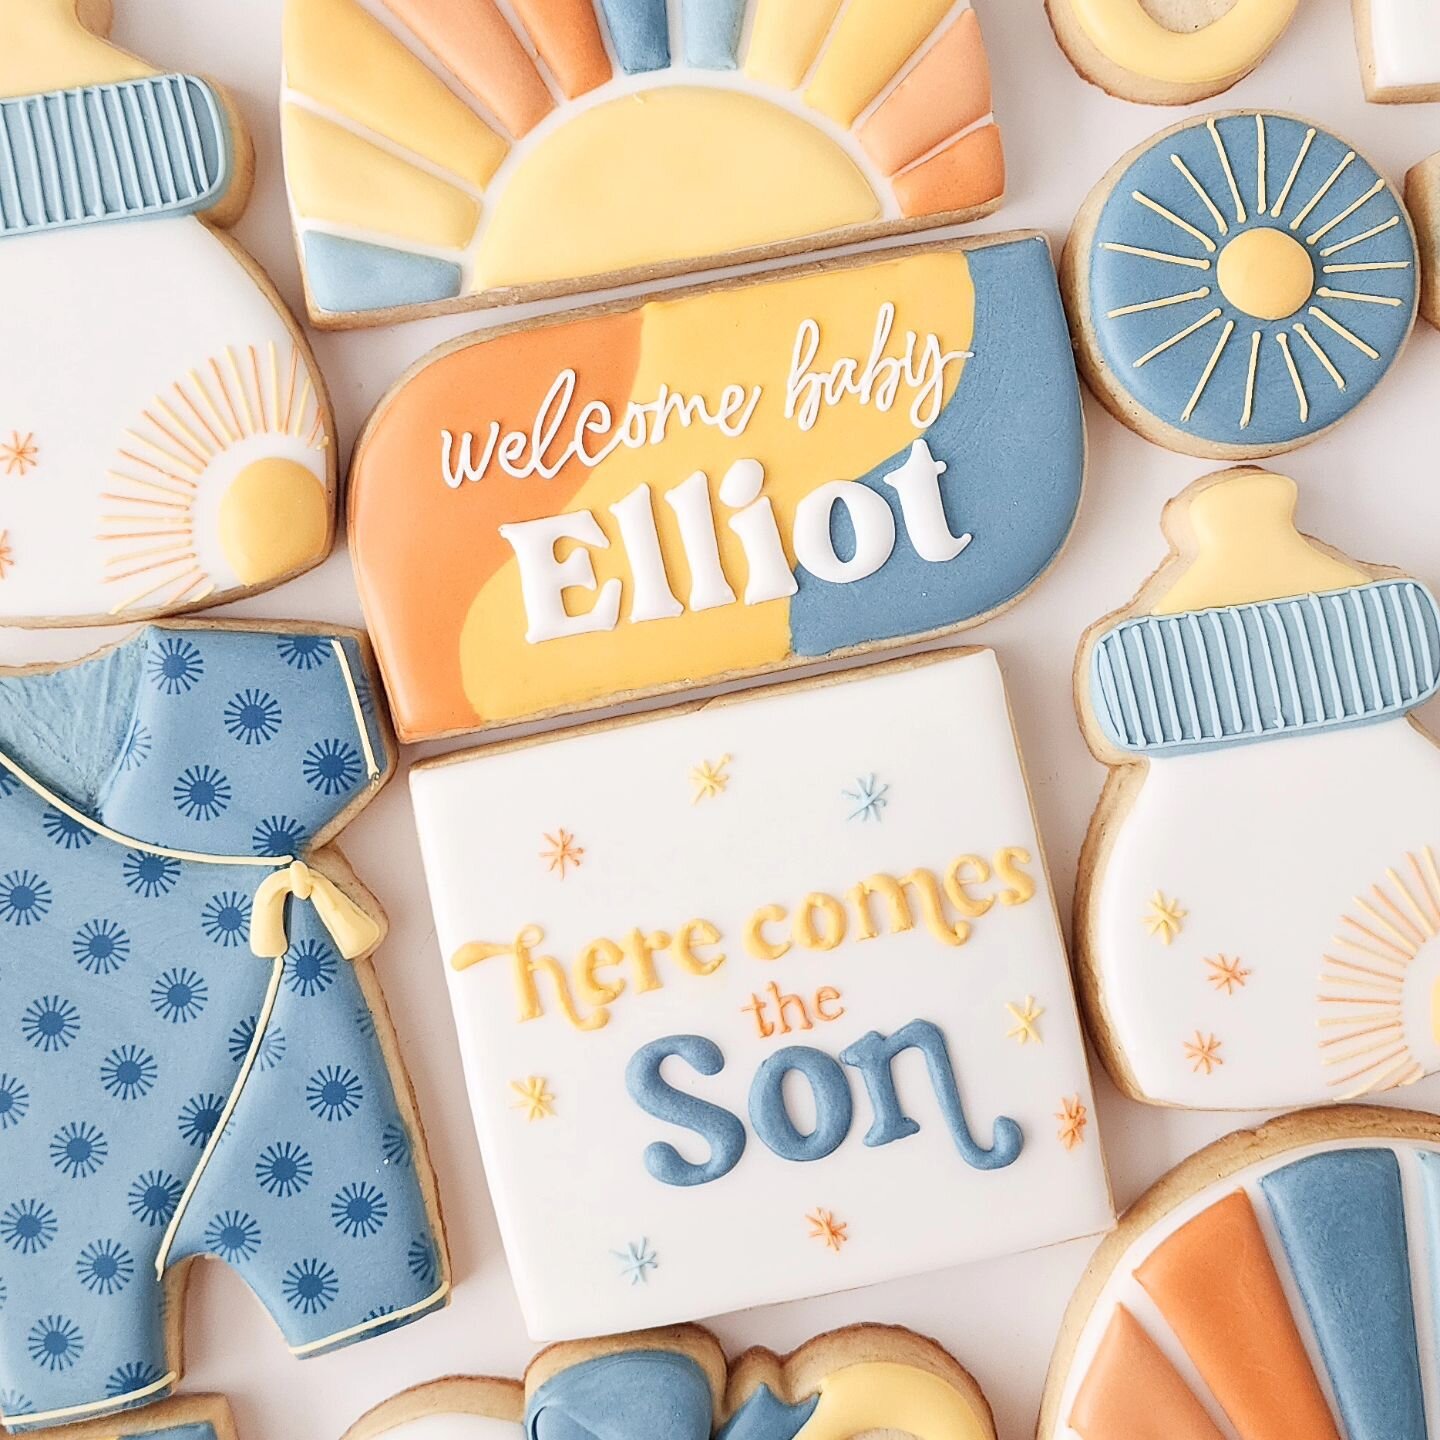 Happy Sunday! ☀️ The sun is shining on this beautiful day in Connecticut! And it feels like the perfect day to share these gorgeous baby shower cookies with you all. 🧡 To the family, thank you for letting me add a little bit of sweetness to your cel